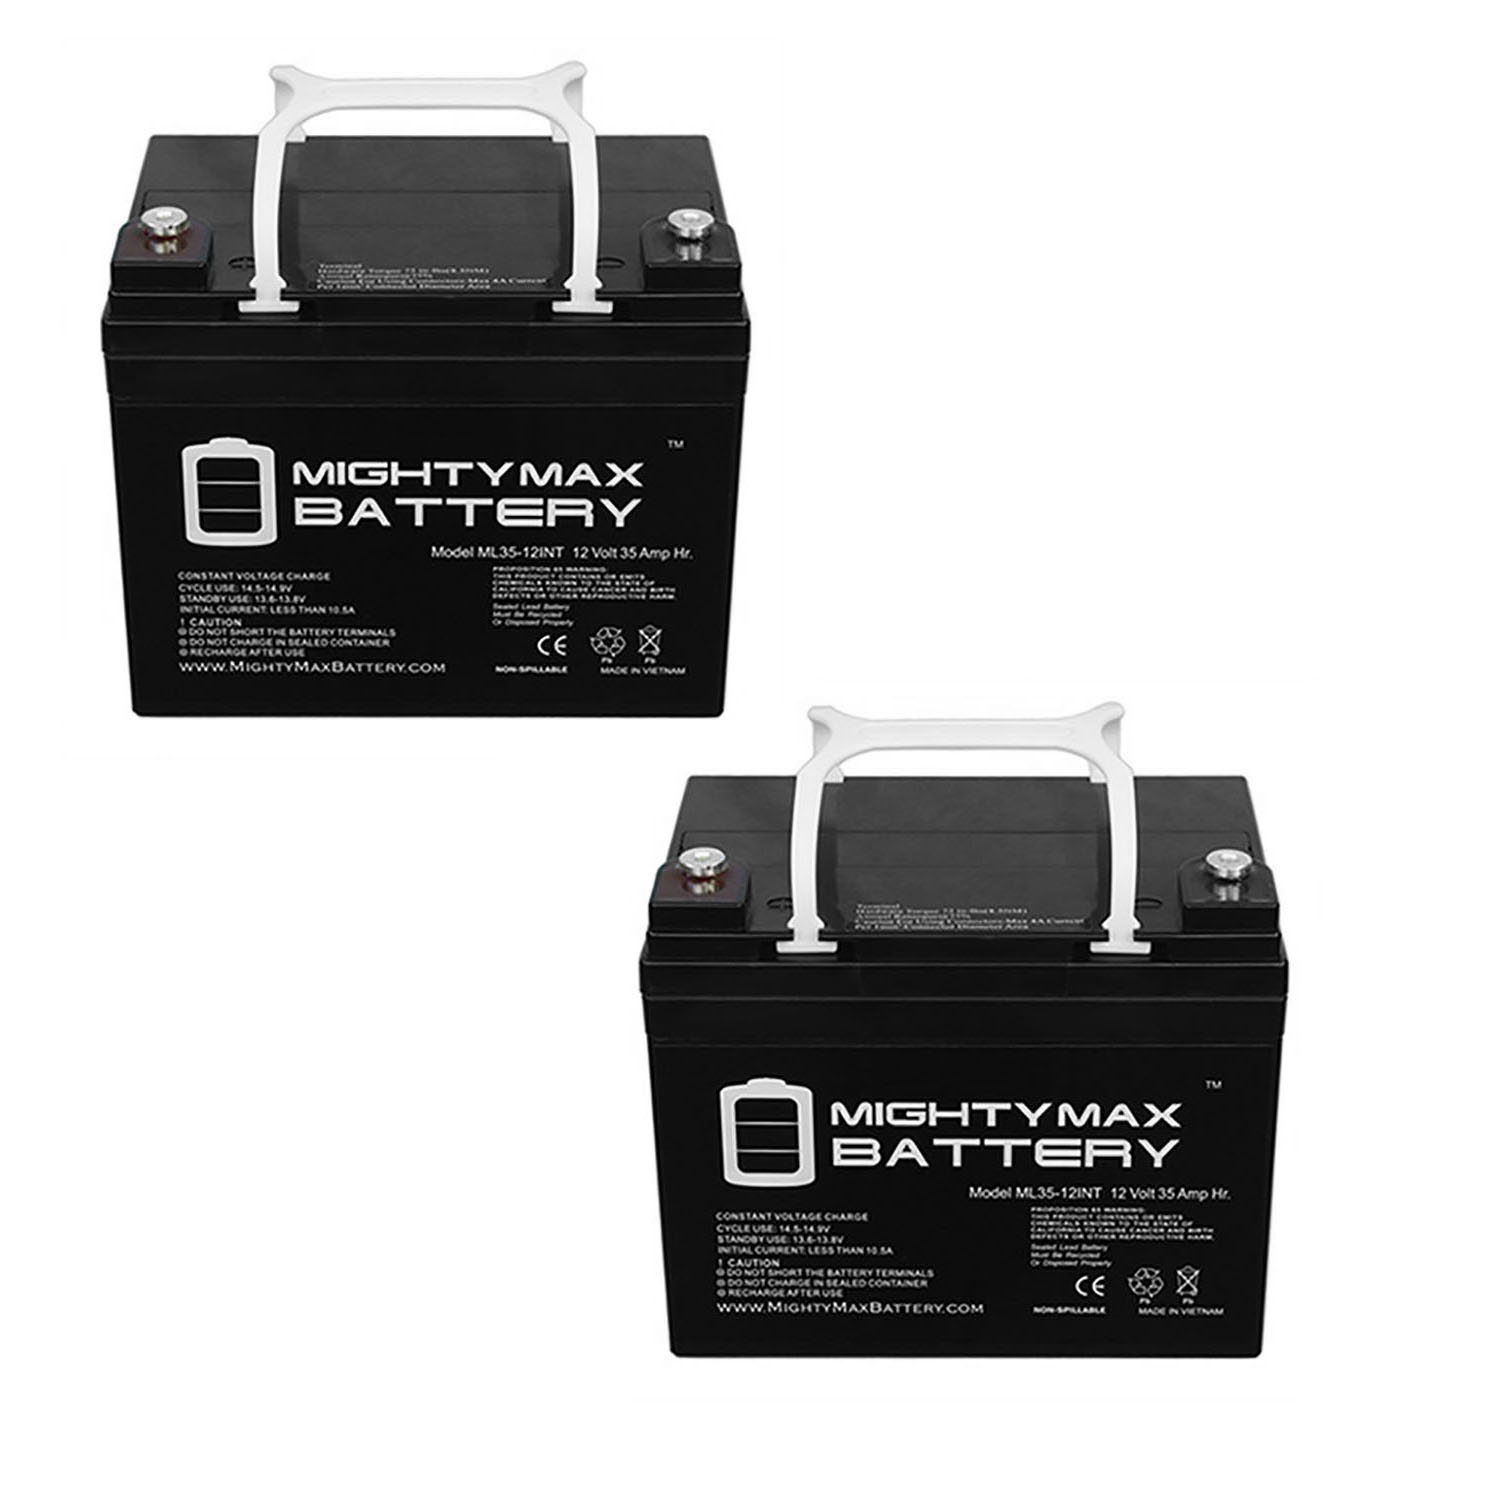 12V 35AH INT Replacement Battery for Exide Bat0065 - 2 Pack